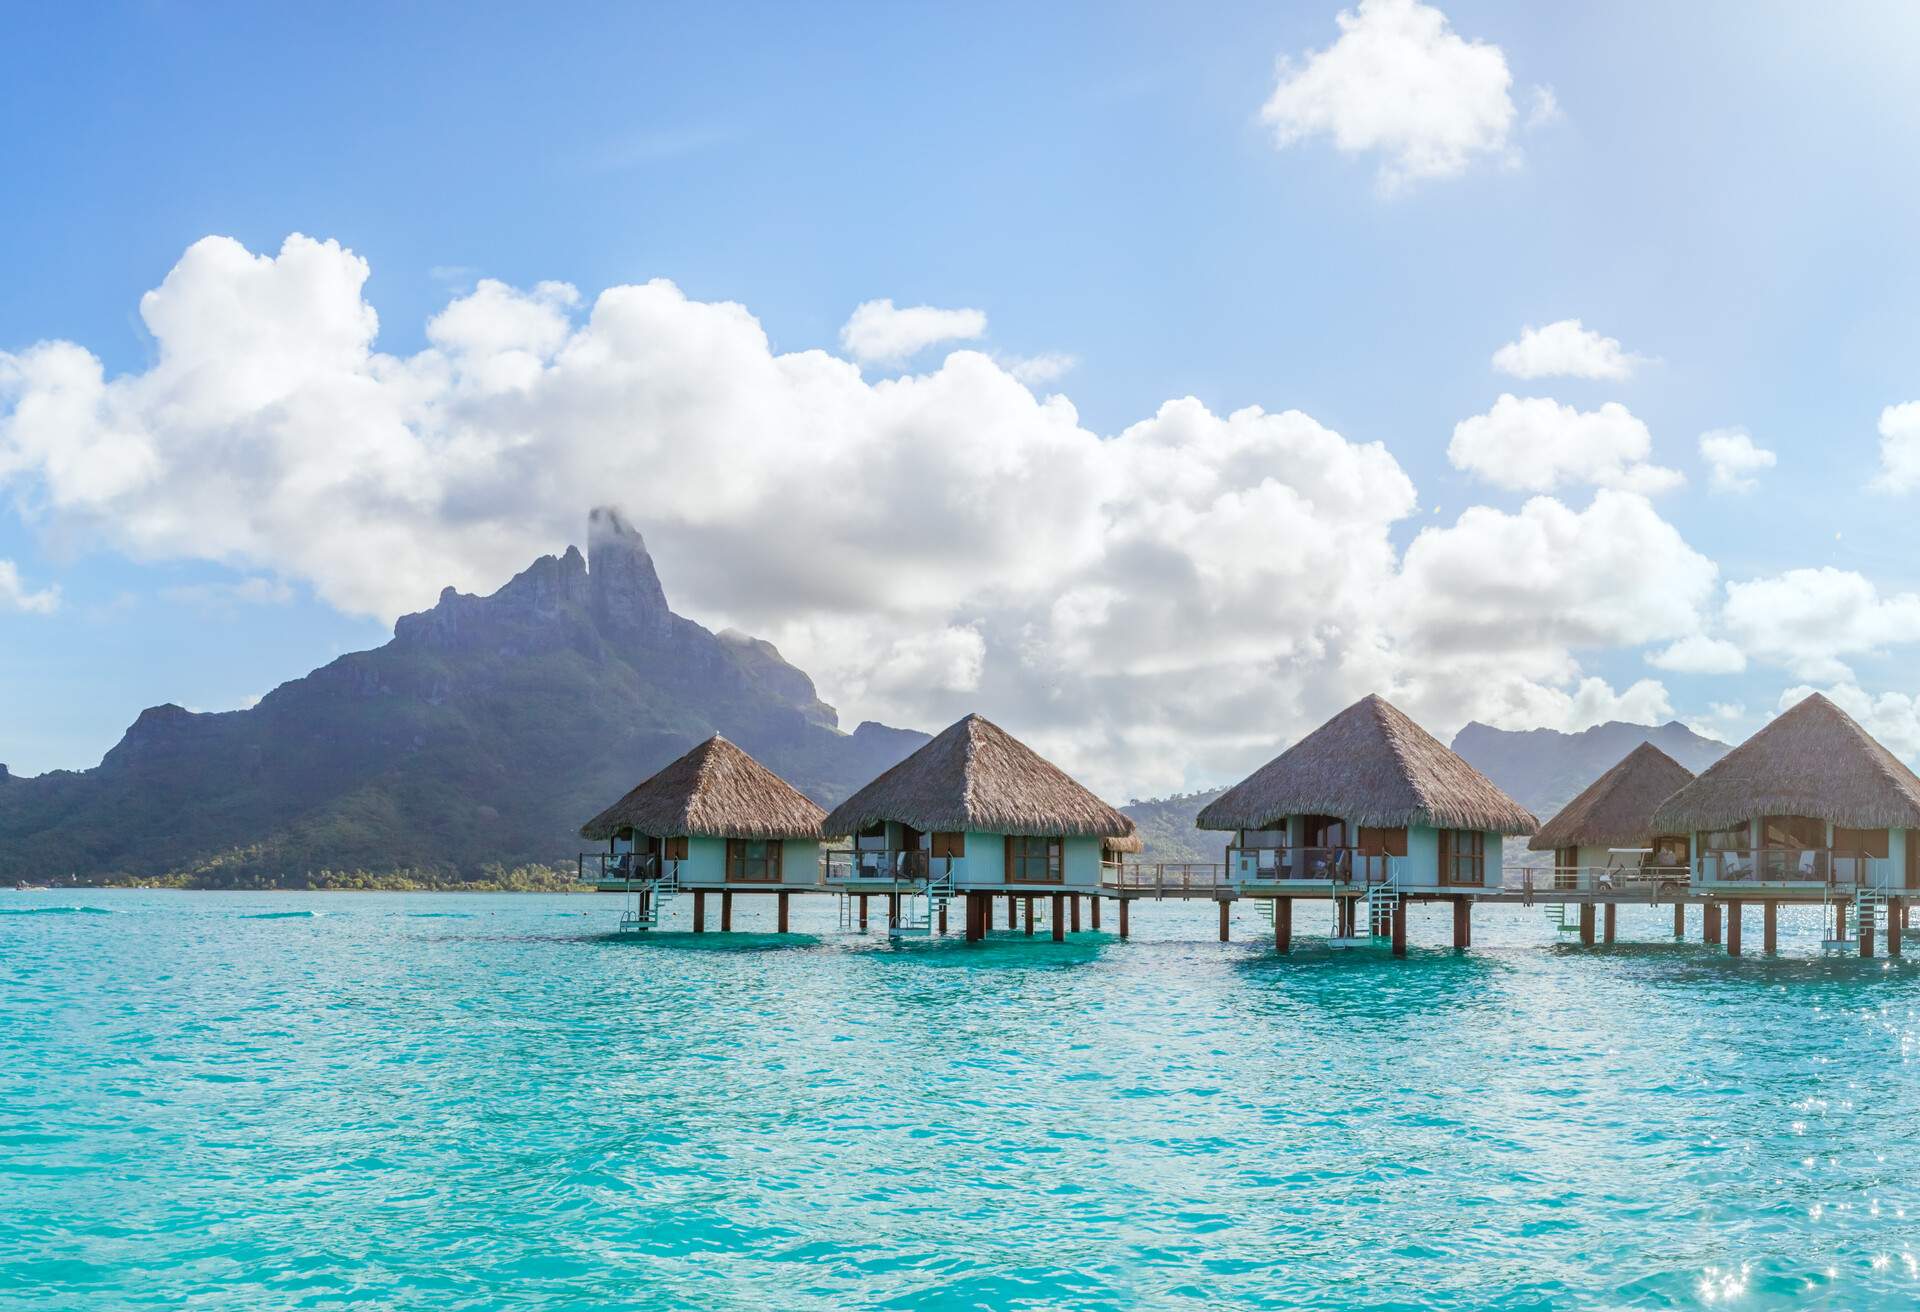 Overwater bungalows in the lagoon of Bora Bora, with Mt Otemanu in the background. Society islands, French Polynesia, Pacific islands.